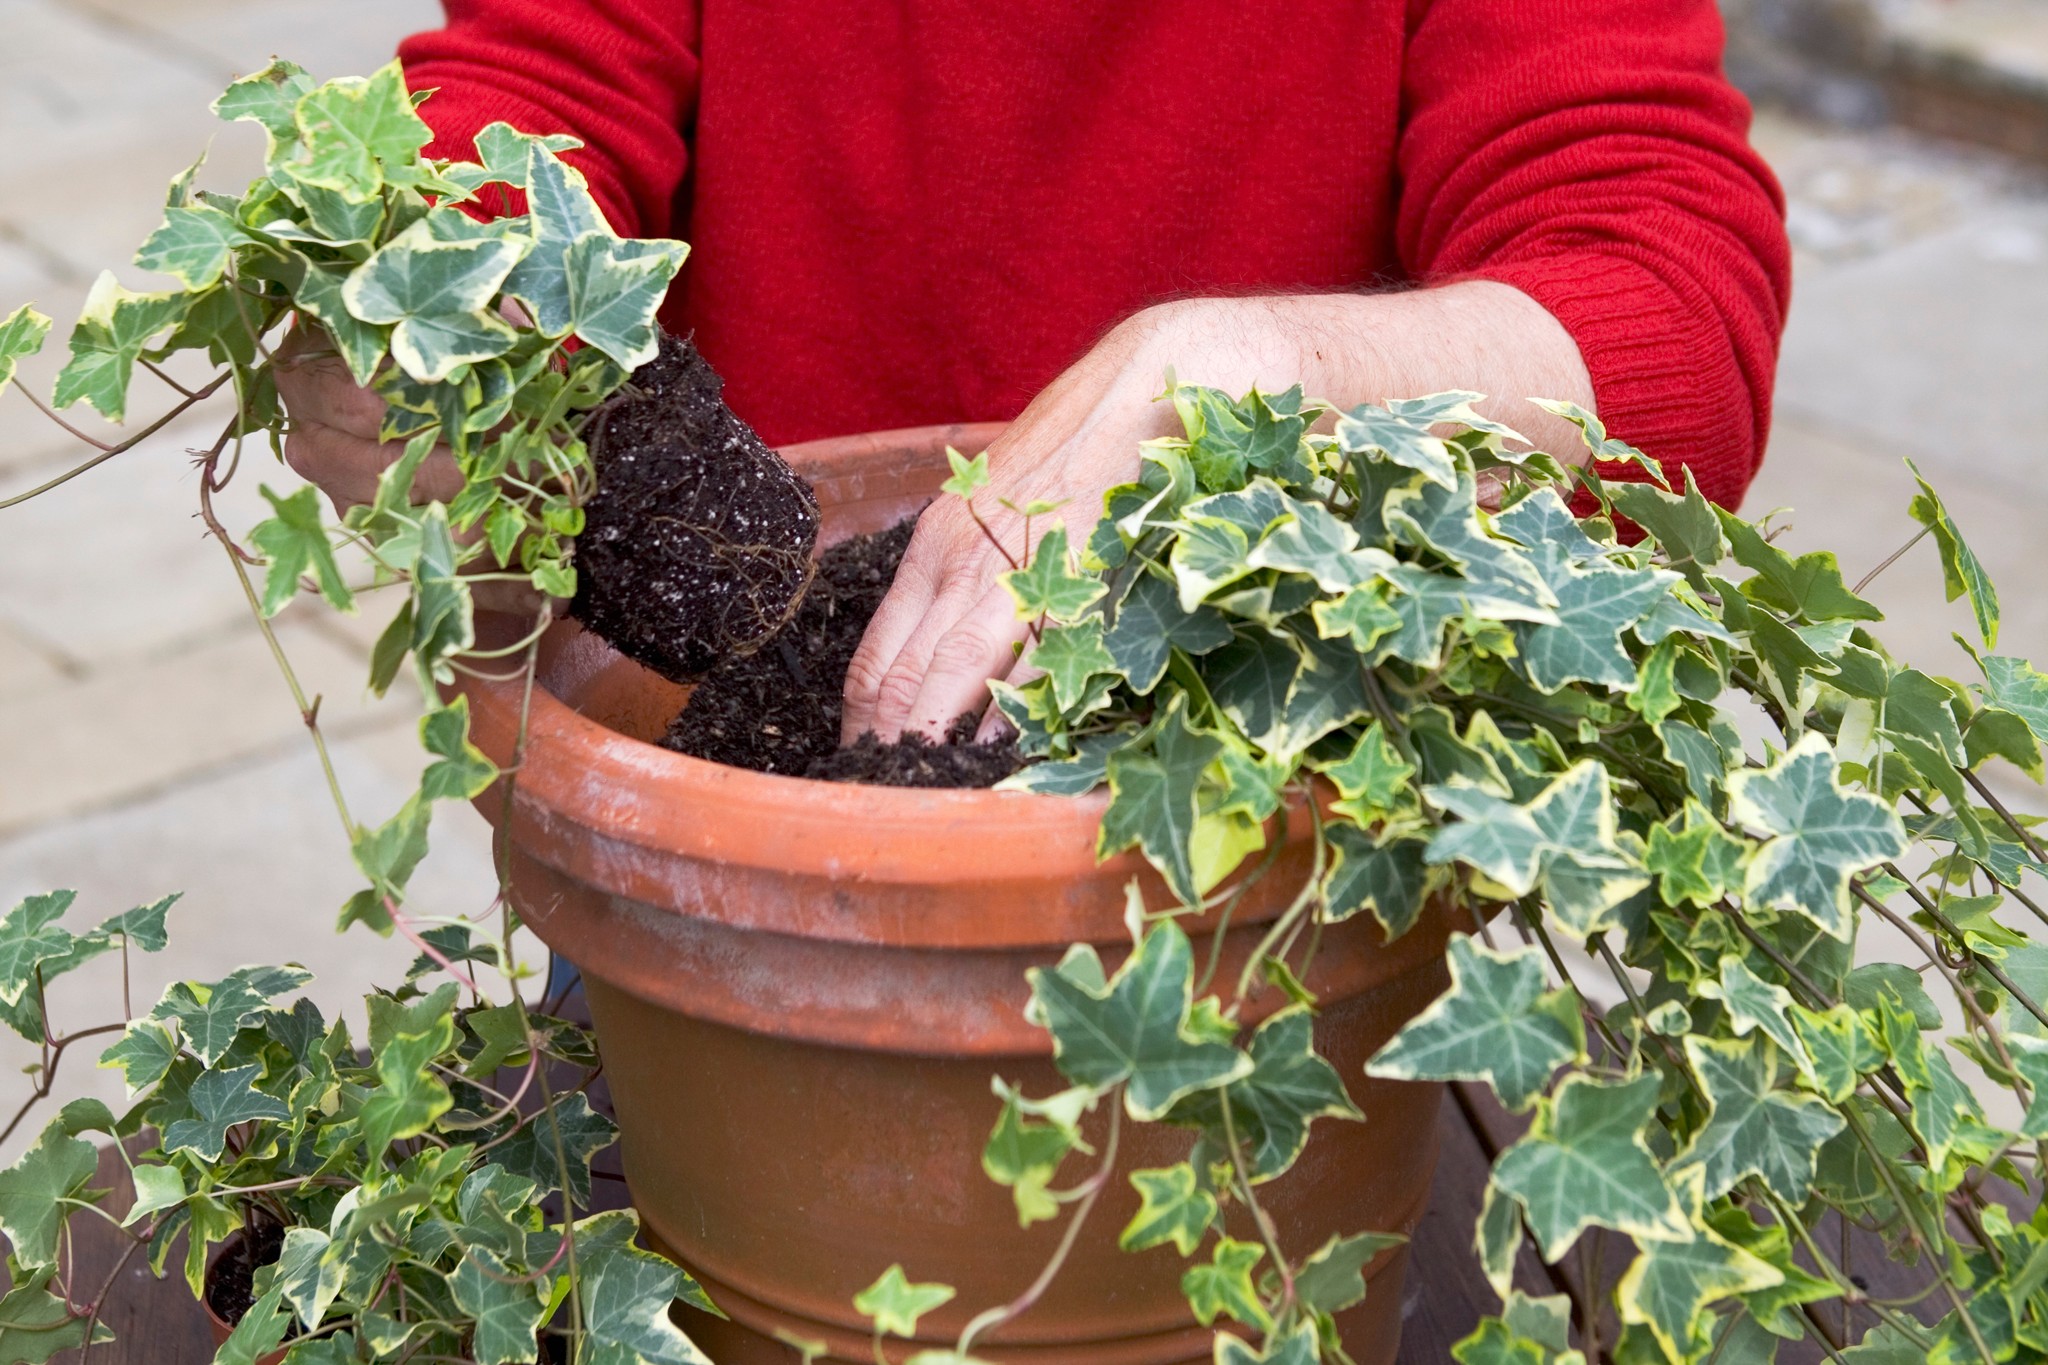 Planting ivy around the edge of a pot